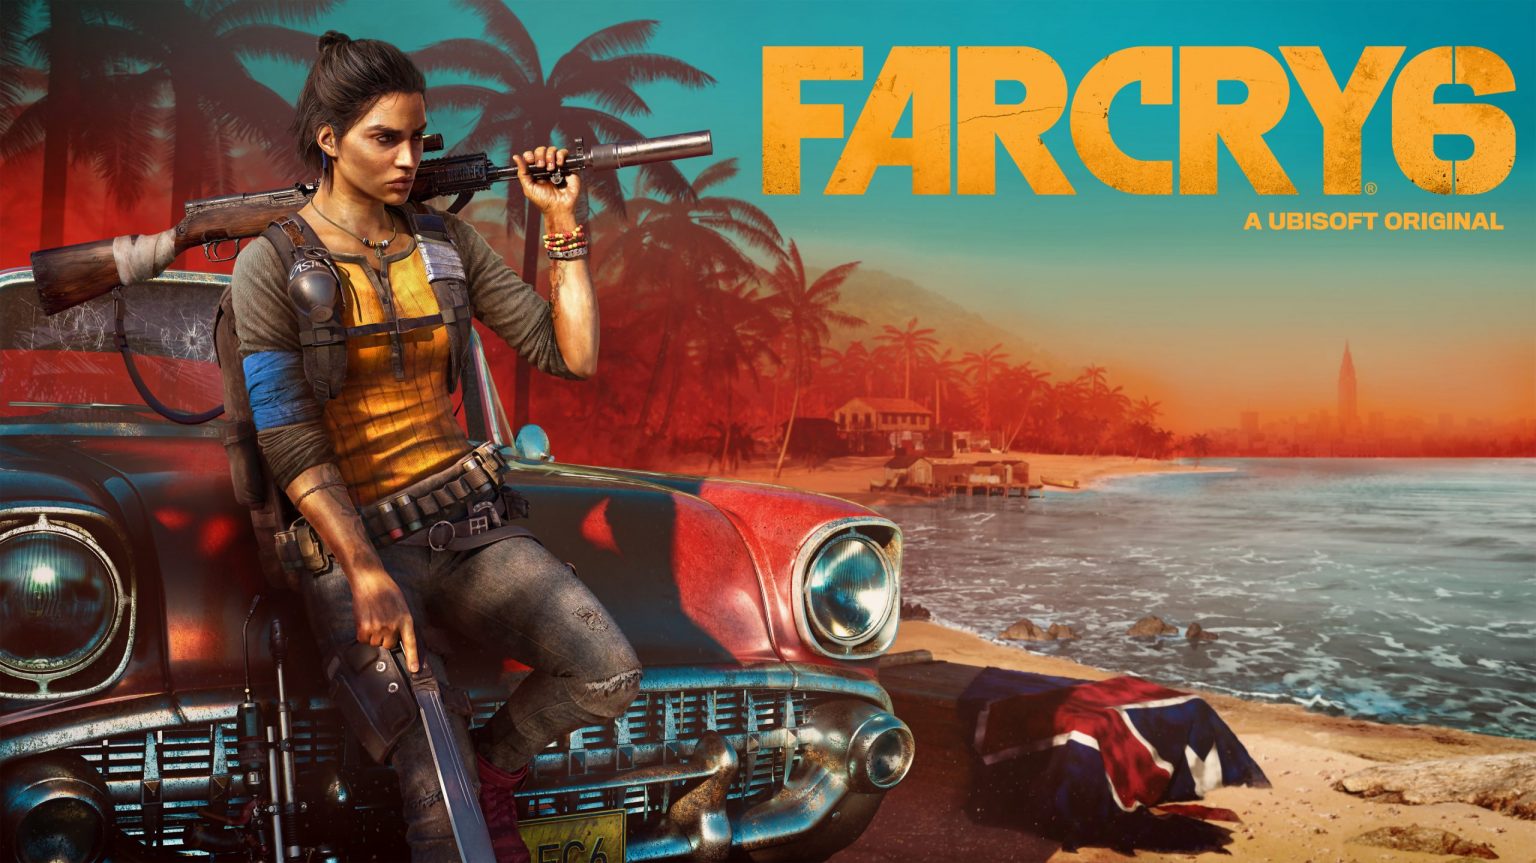 download far cry 6 season pass for free